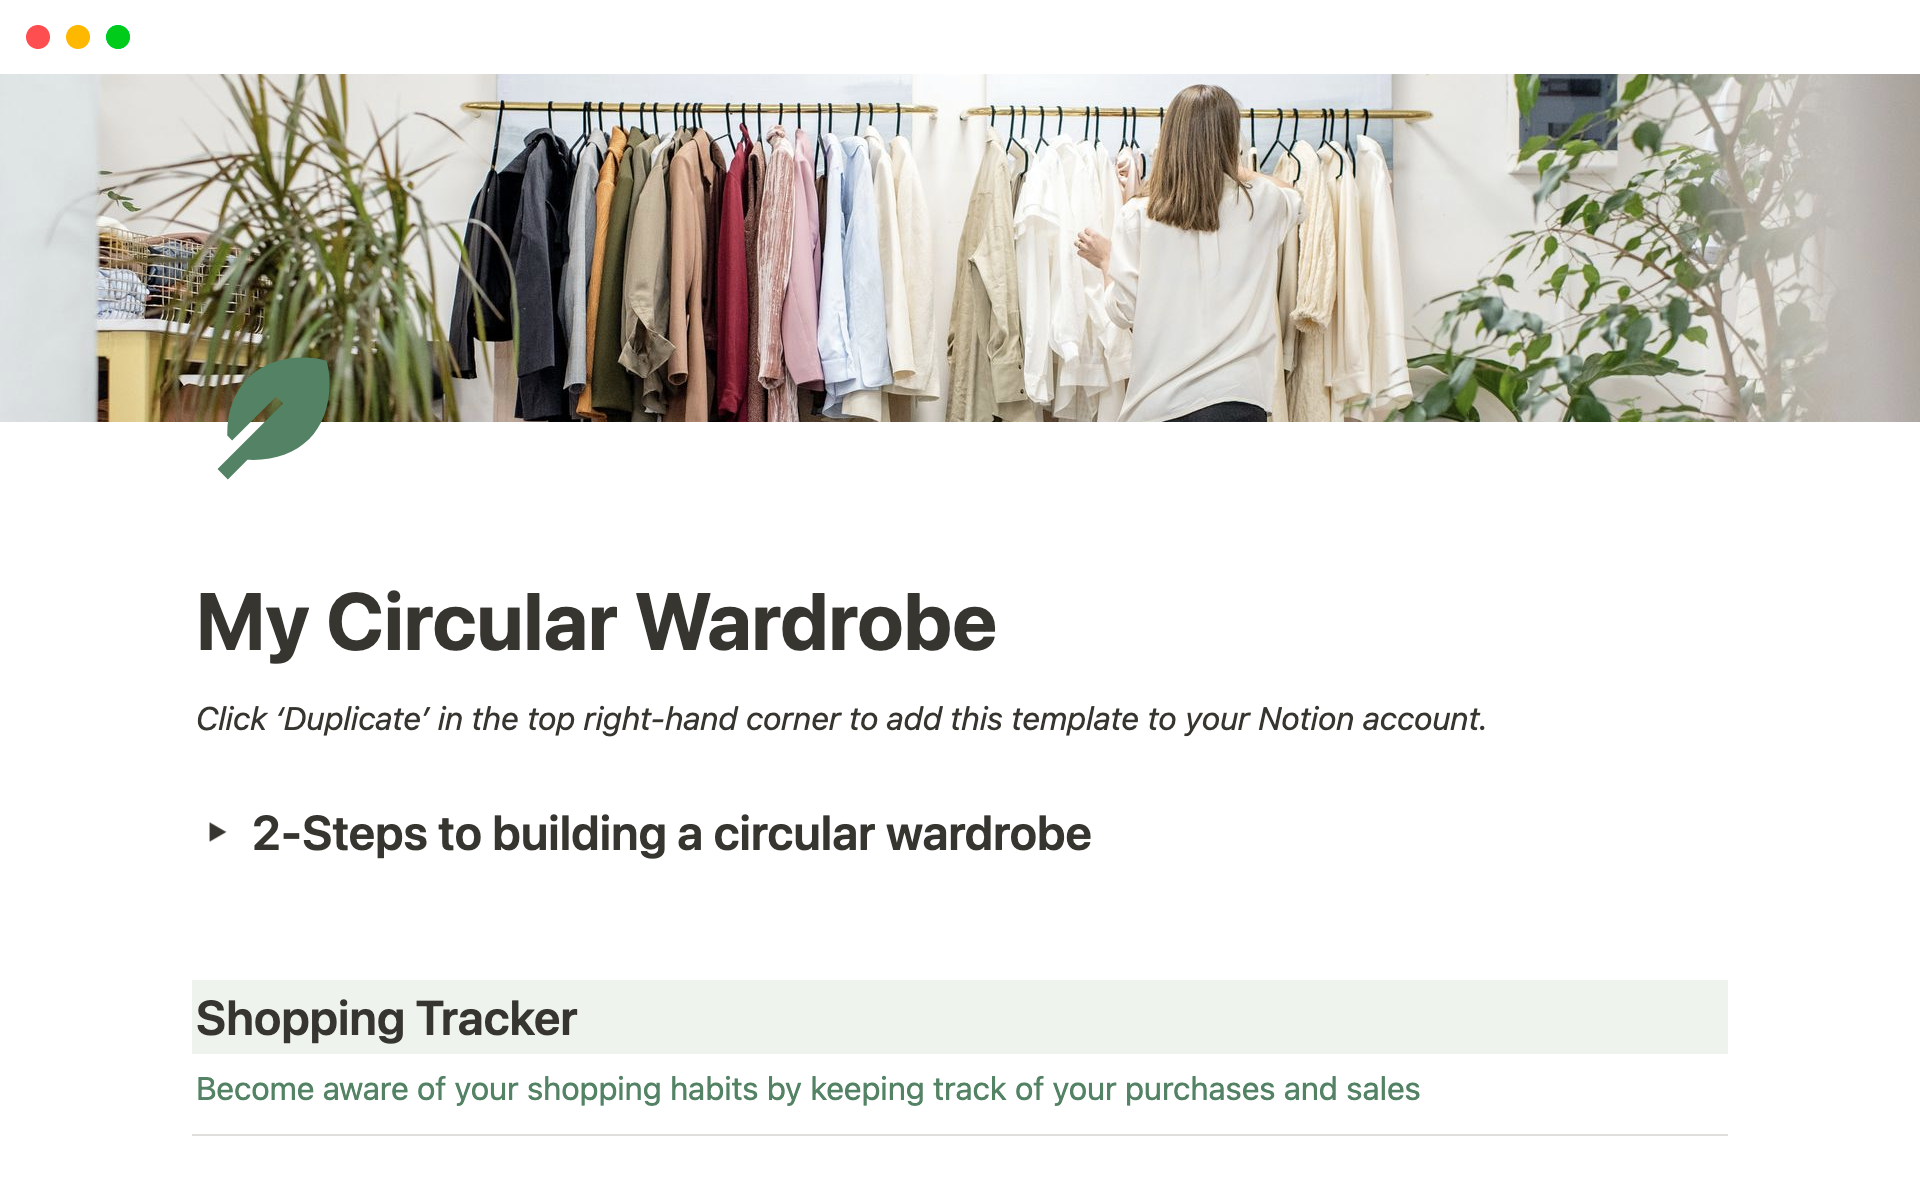 This template will help you create a circular wardrobe and healthy shopping habits.